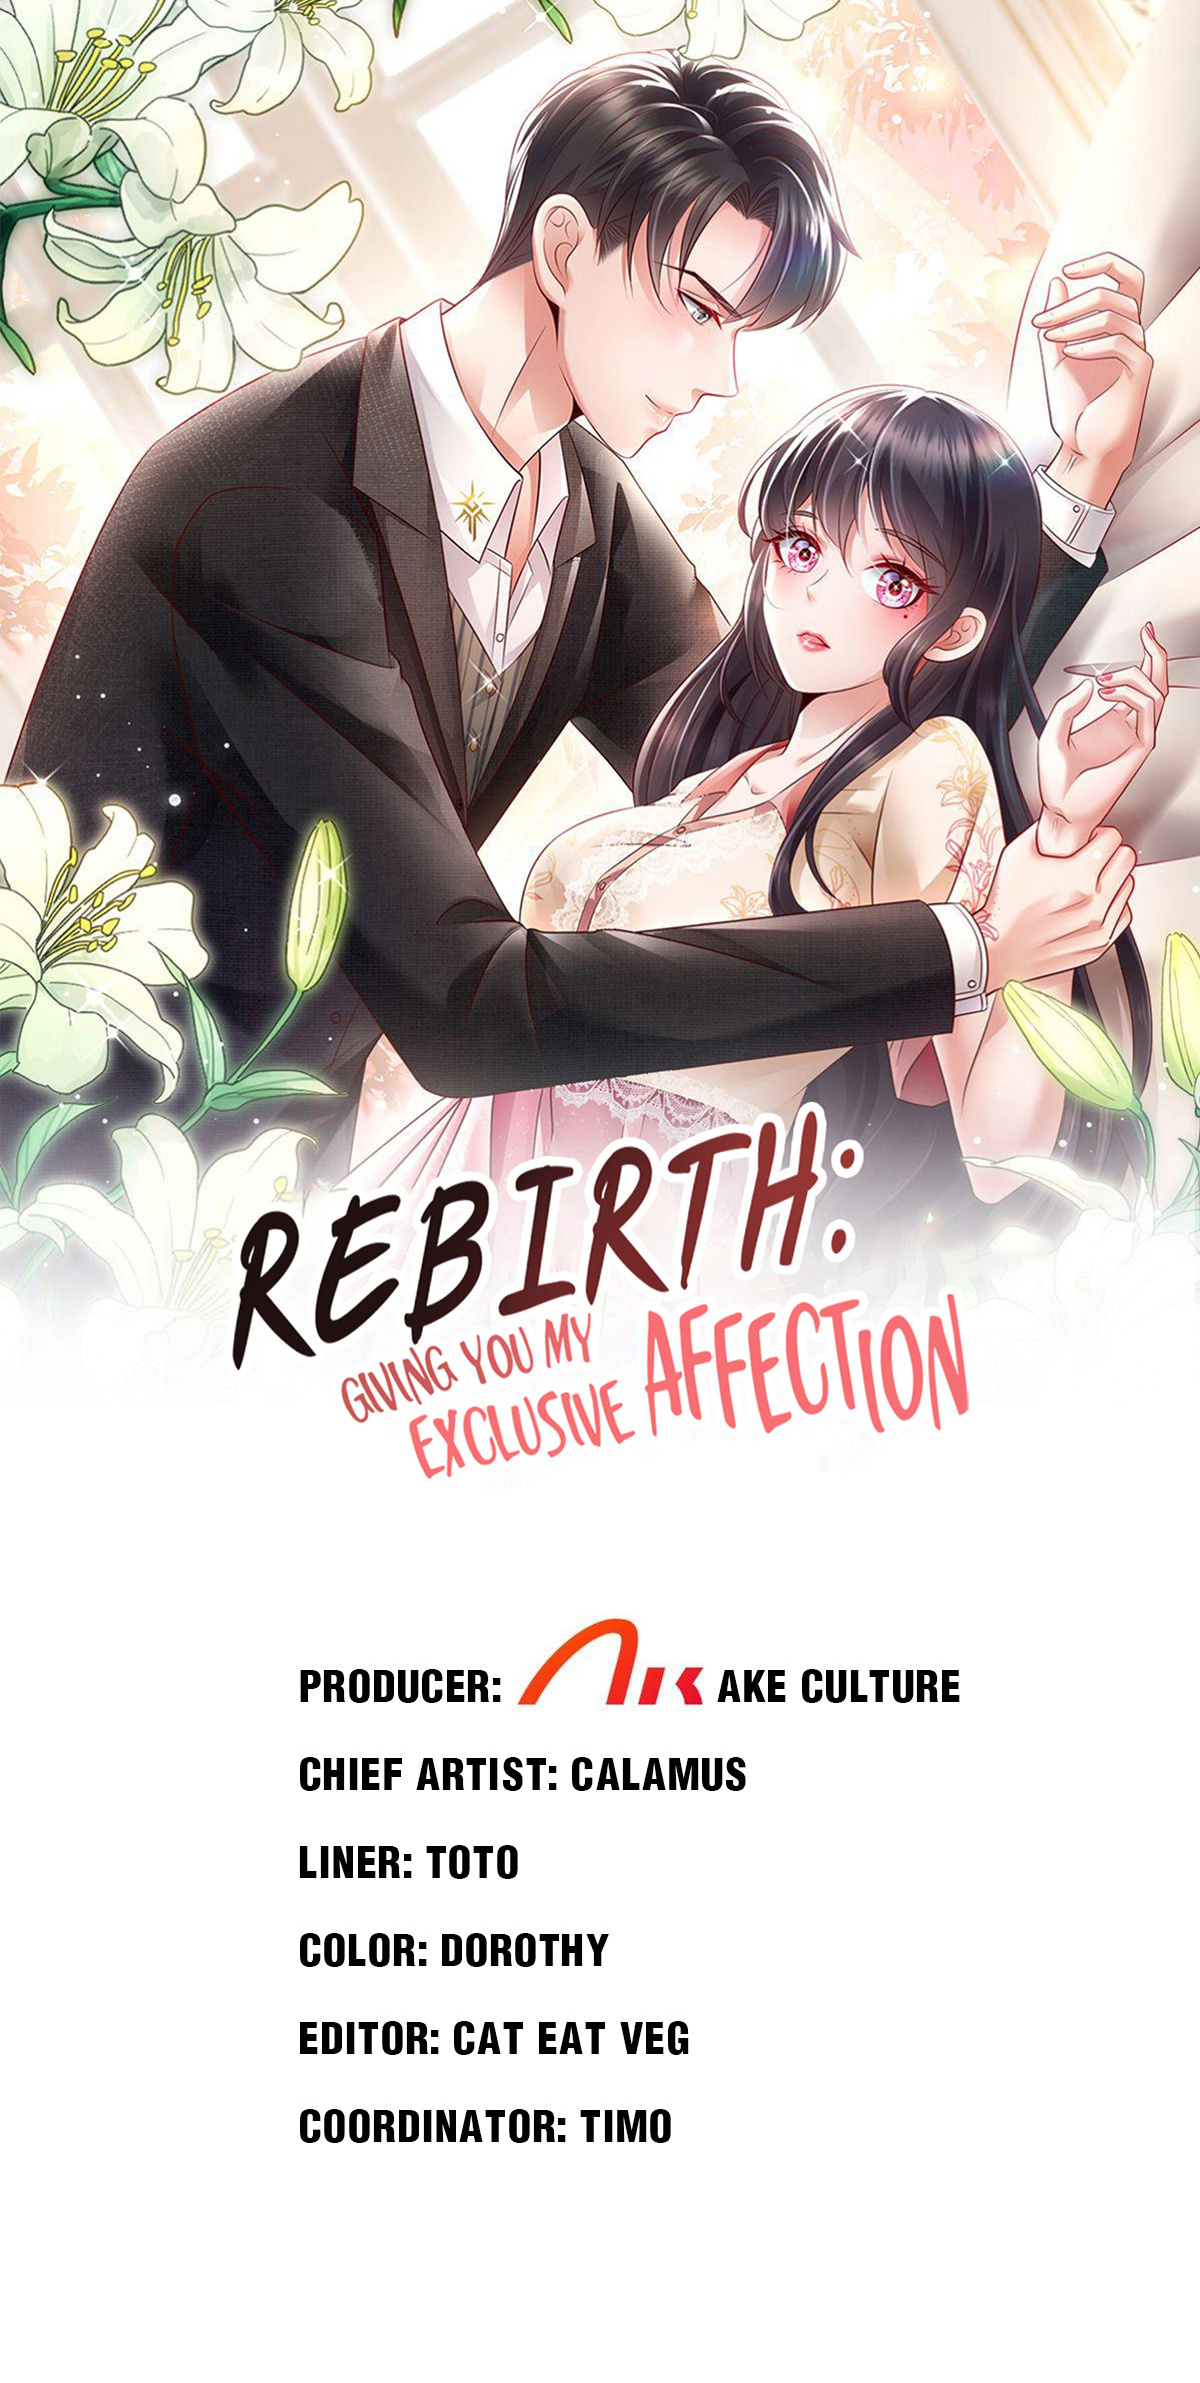 Rebirth: Giving You My Exclusive Affection 258